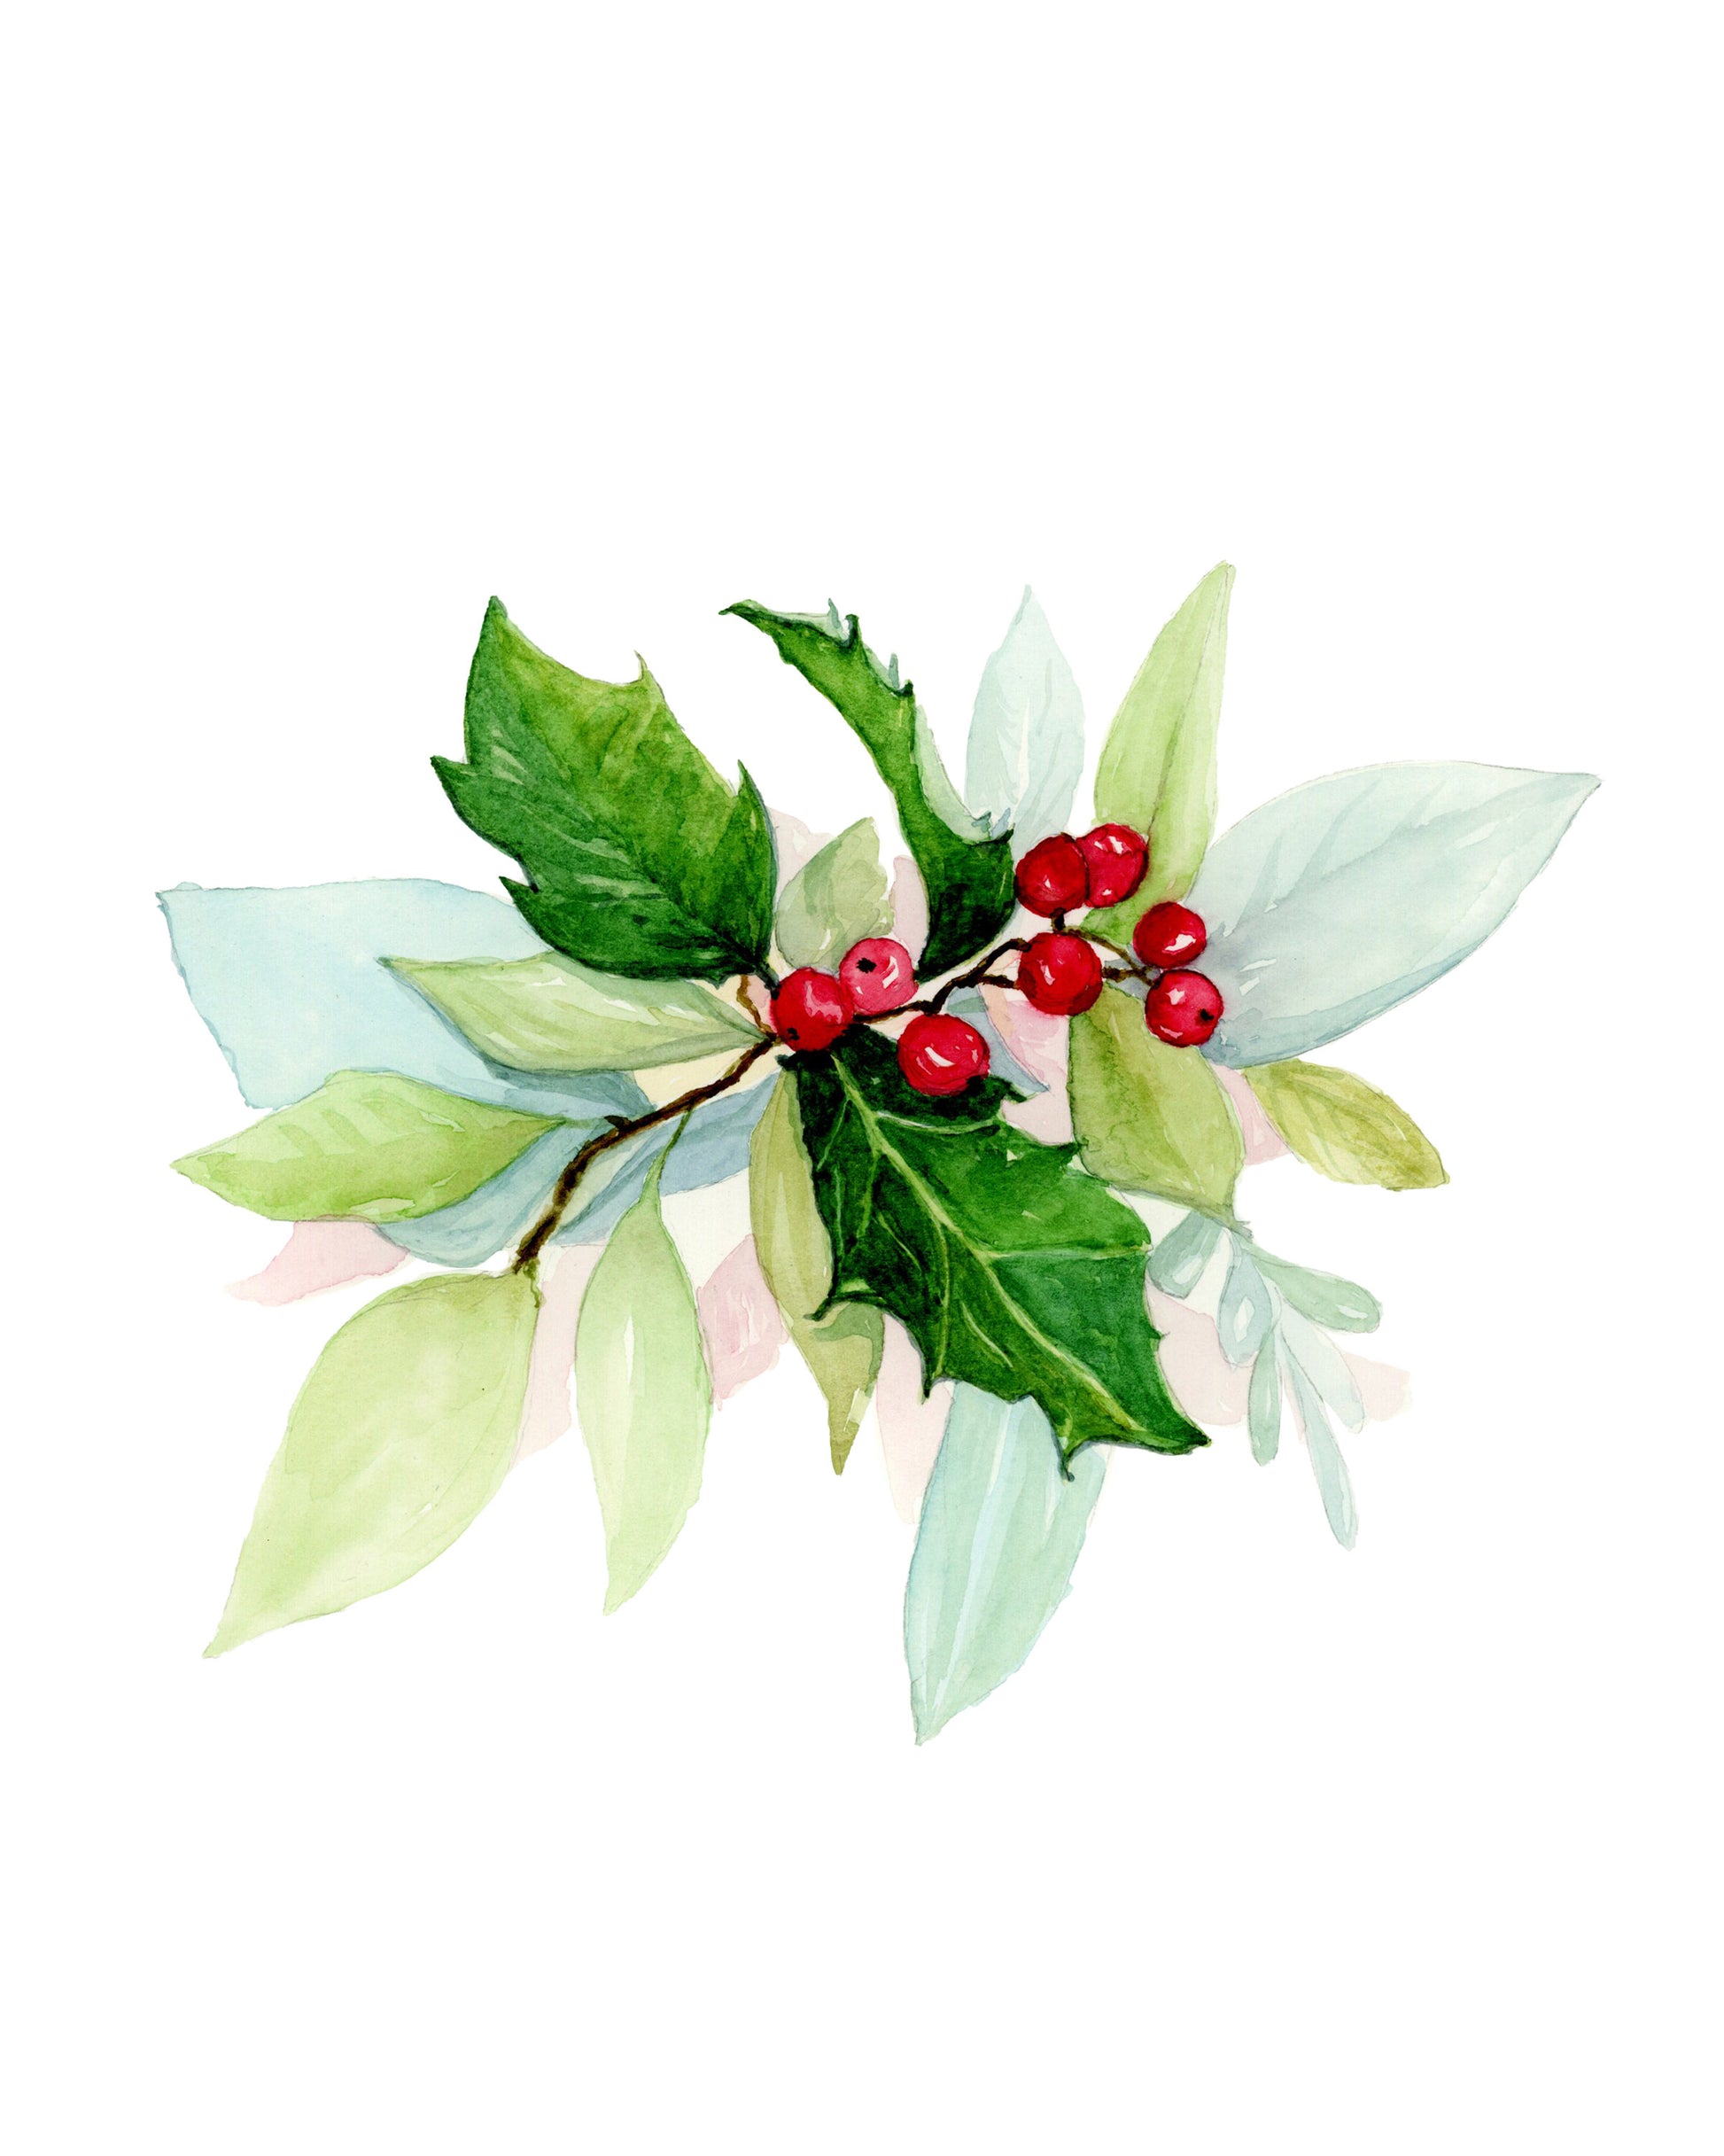 CHRISTMAS - Holly Berries on Wood Block 5x5 or 8x8. Original Watercolo –  Flamingo Shores - Original Art for Home Decor and Gifts